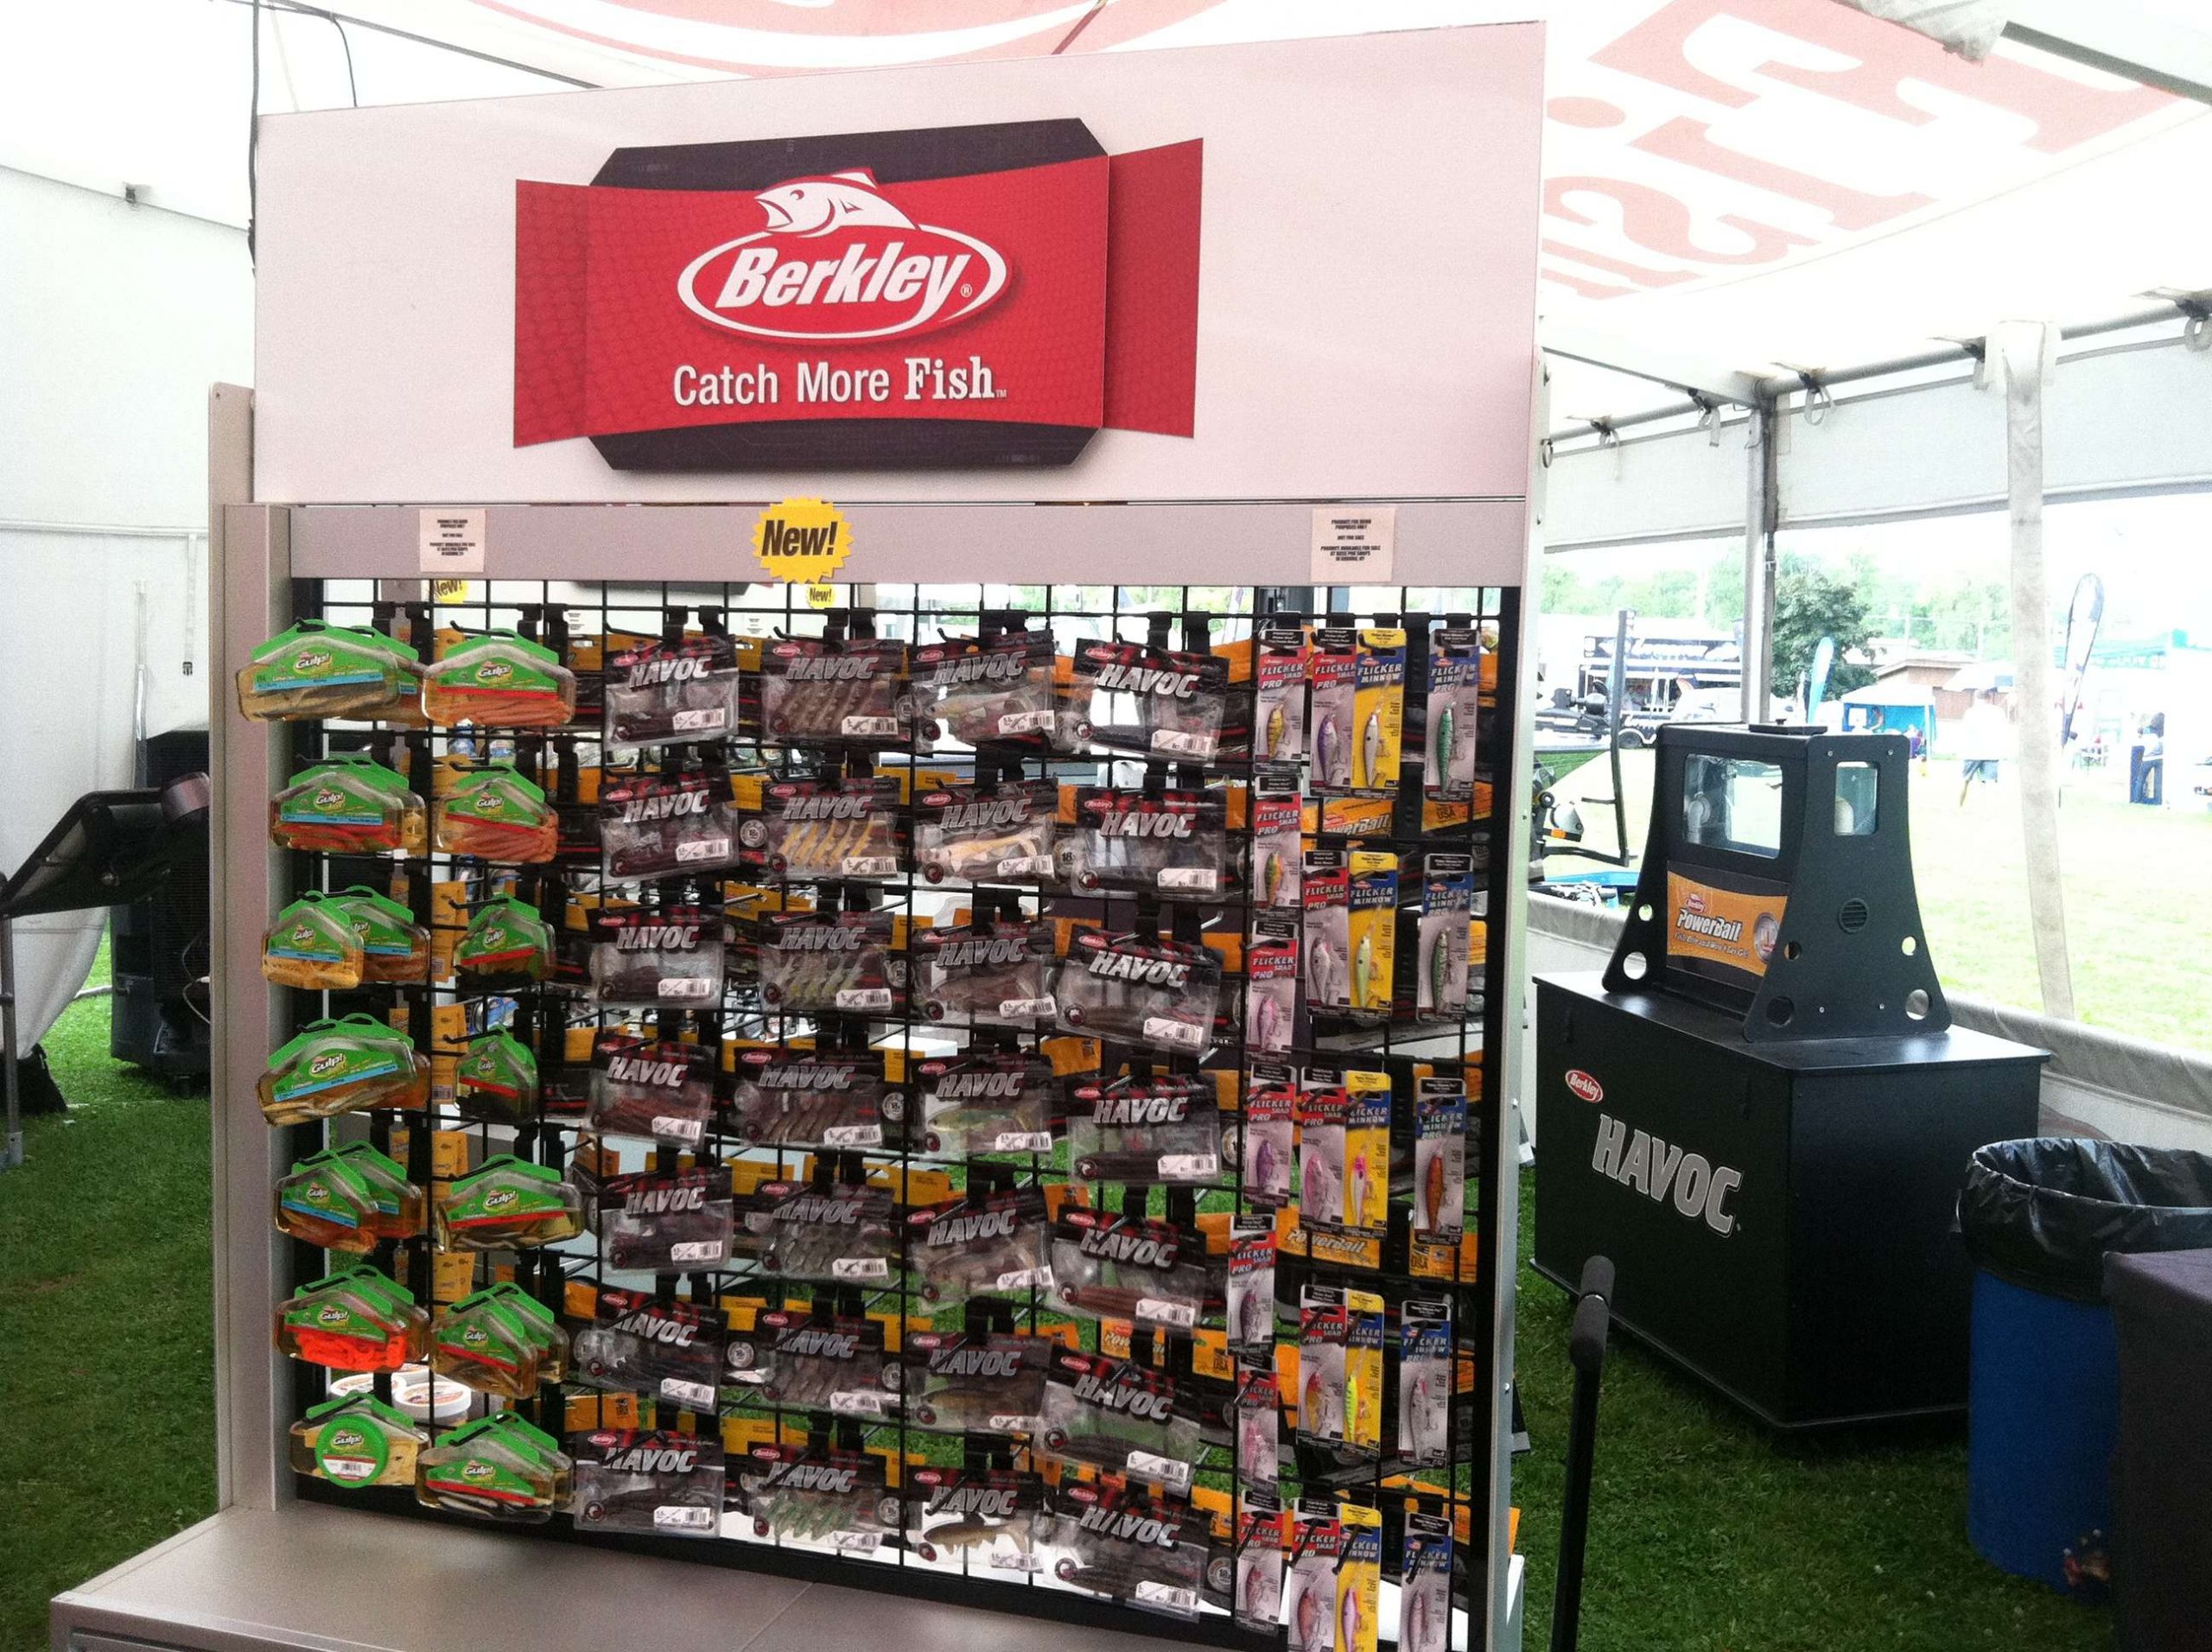 Stop by the Berkley booth and see all the latest in fishing line. 